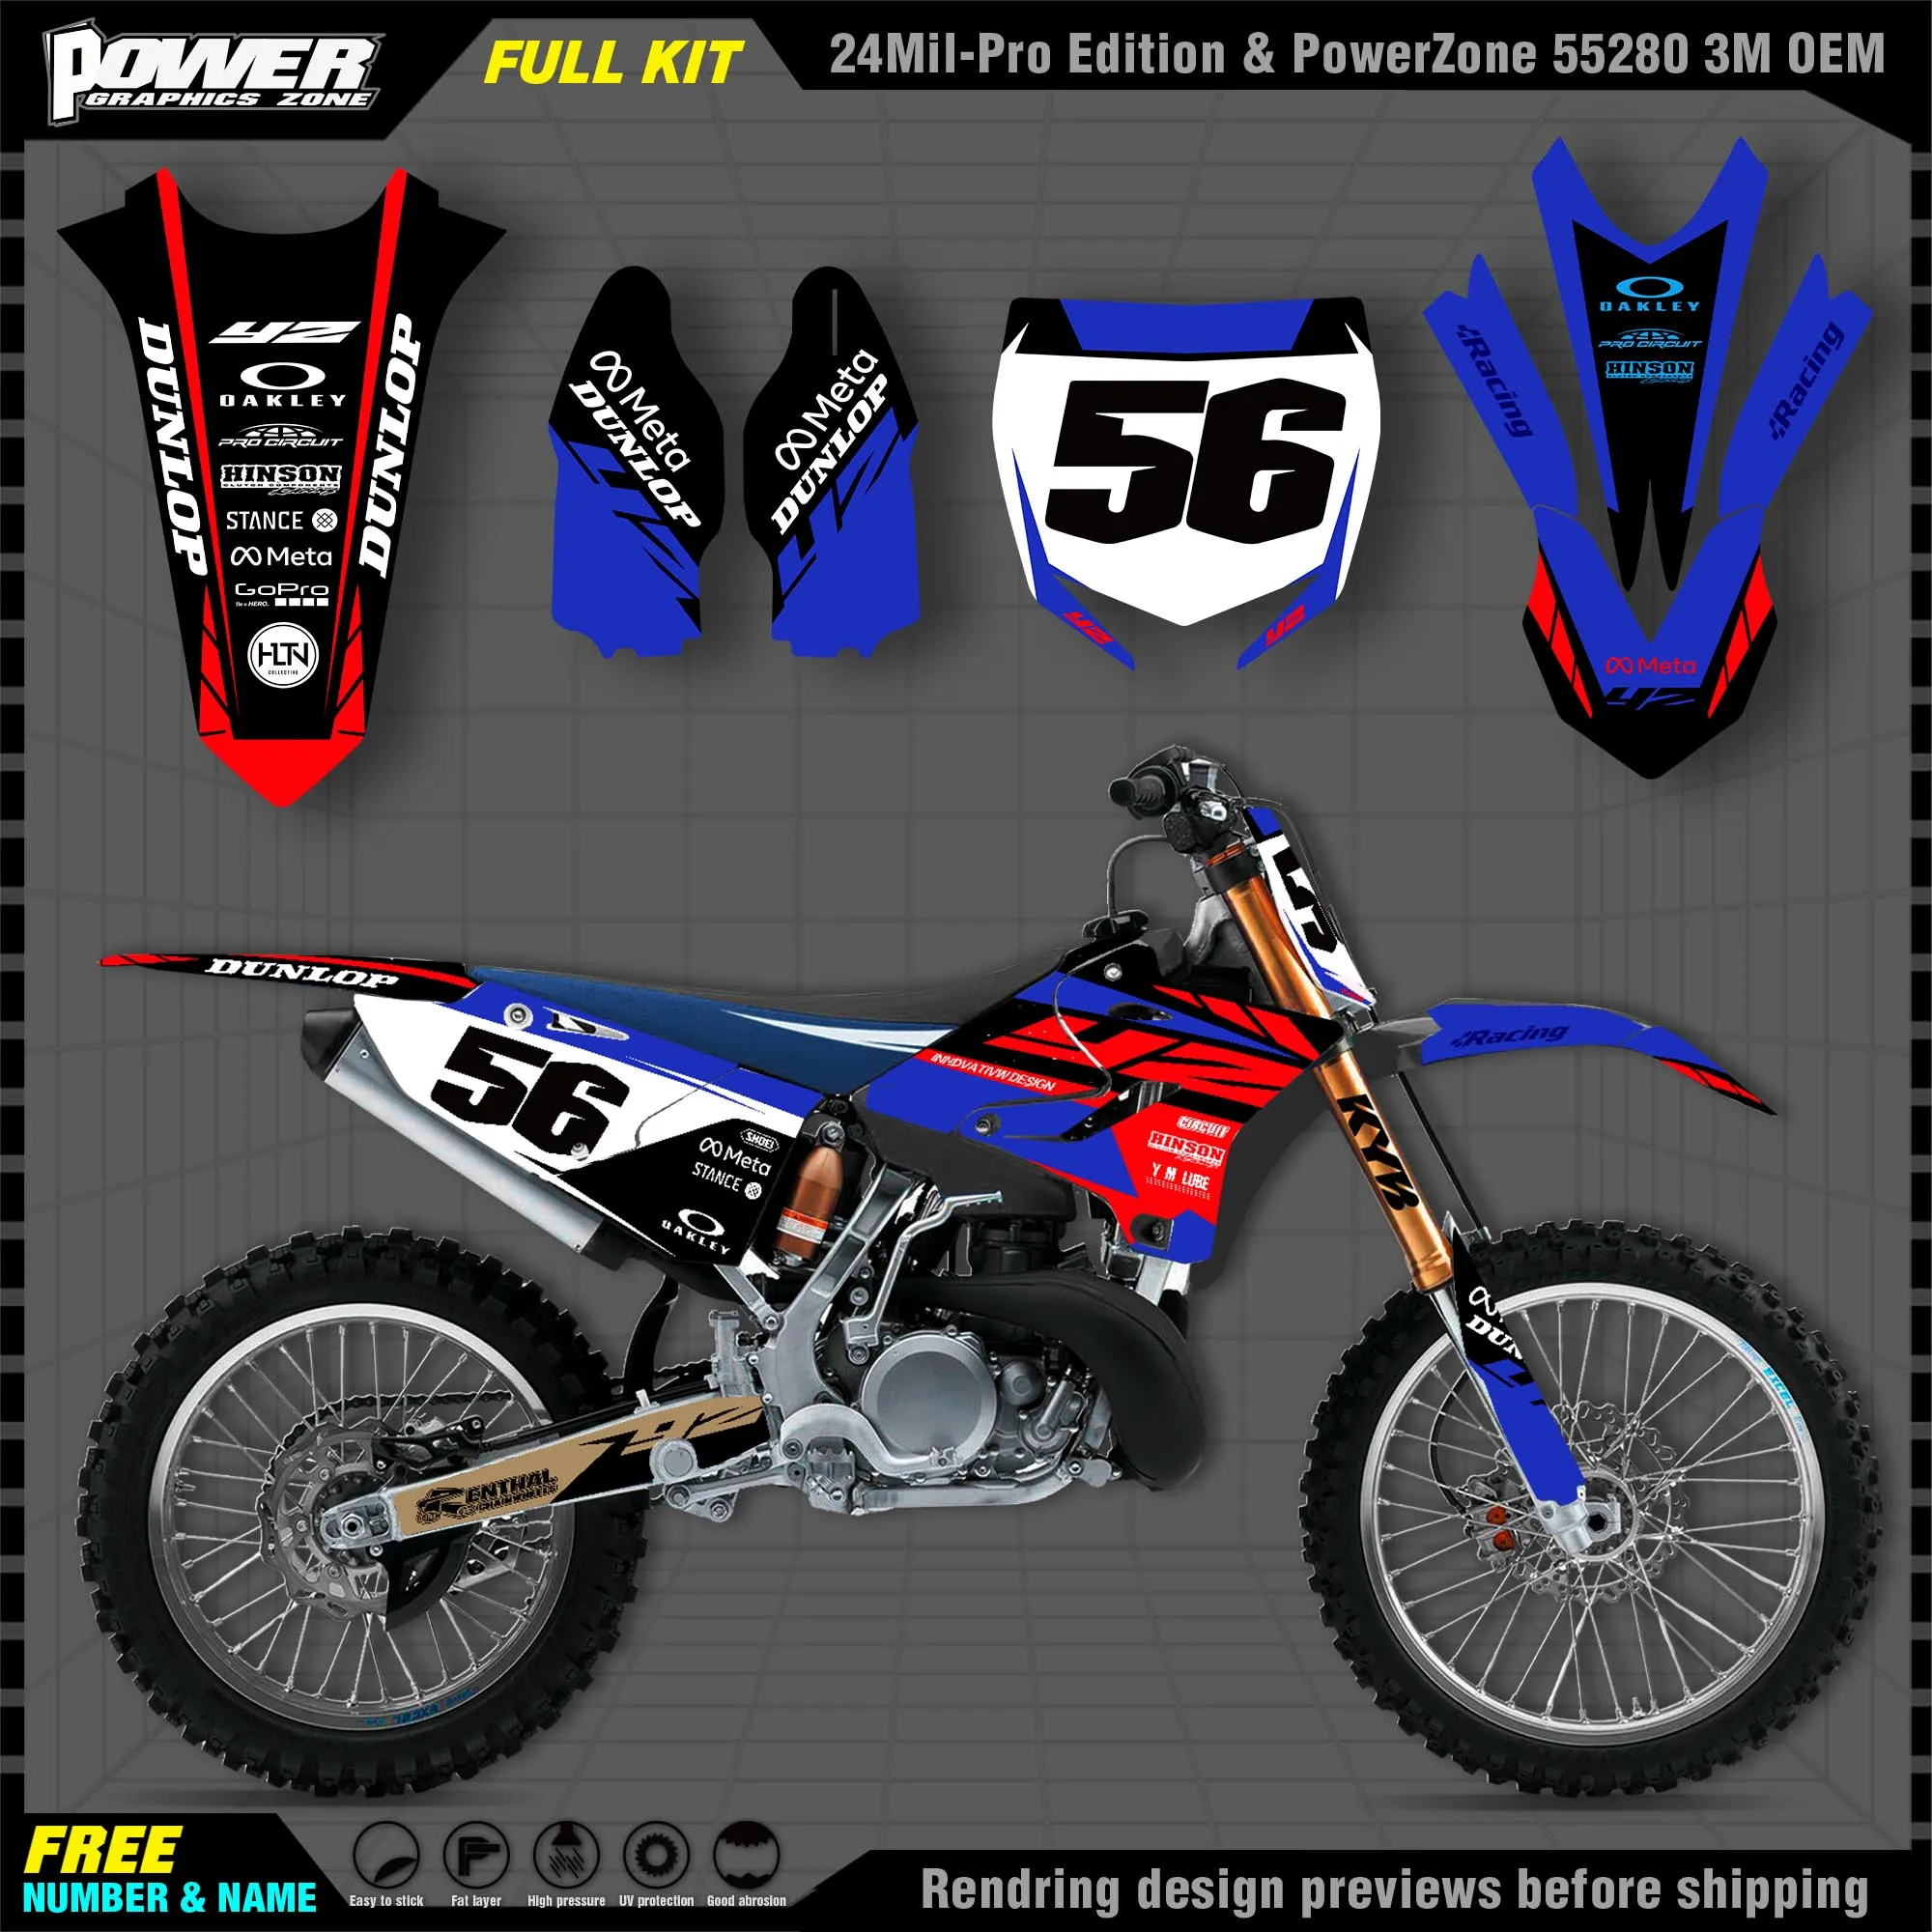 

PowerZone Custom Team Graphics Backgrounds Decals 3M Stickers Kit For YAMAHA 2015 2016 2017 2018 2019 YZ125-250 004